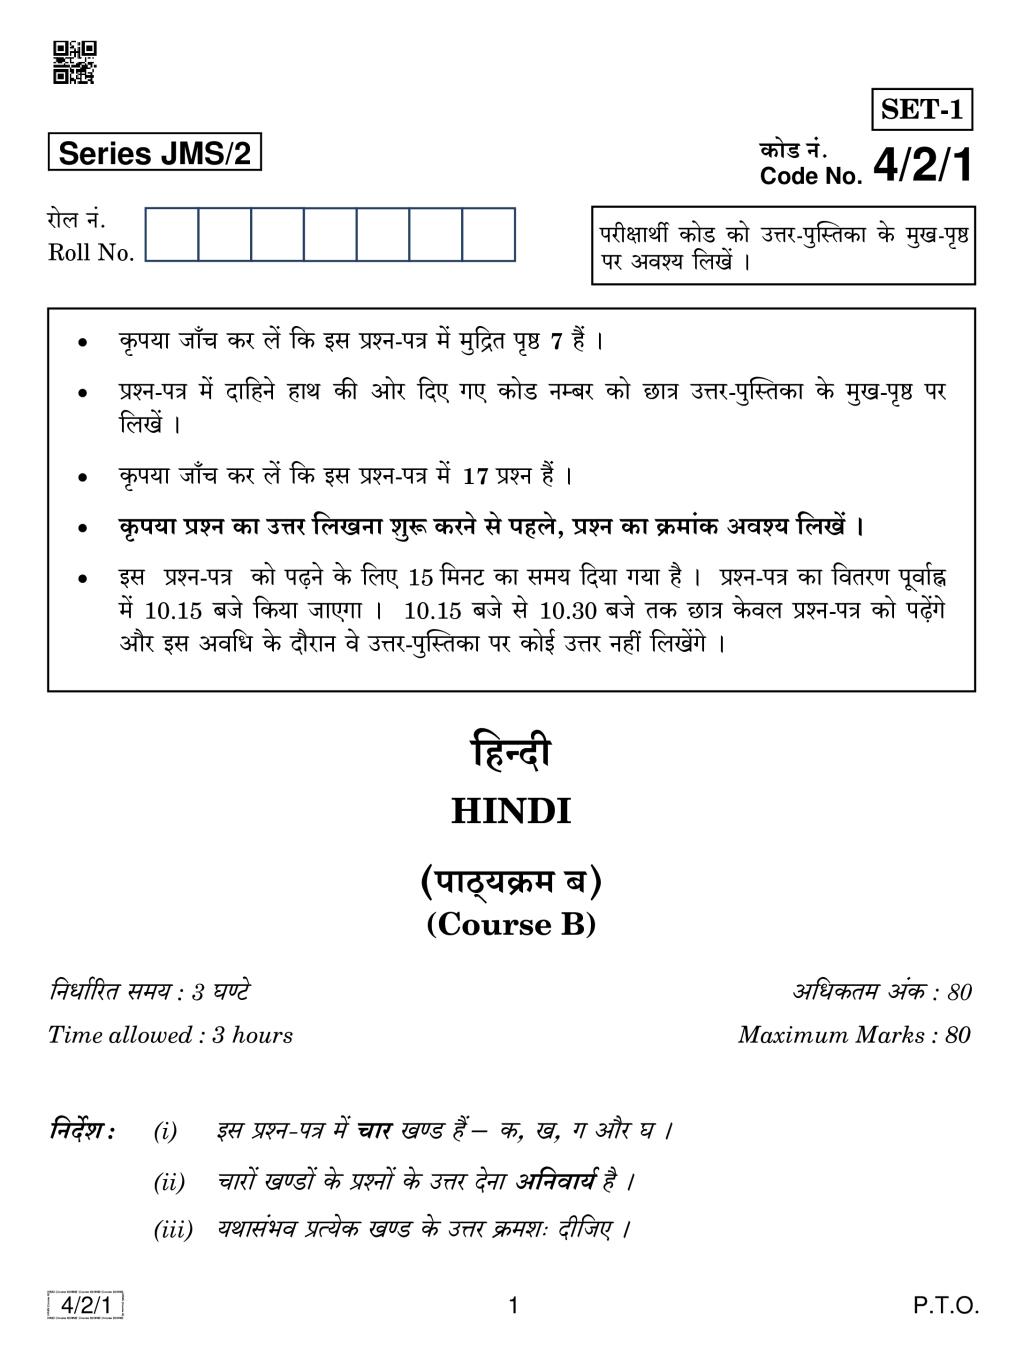 CBSE Class 10 Hindi Course B Question Paper 2019 Set 2 - Page 1